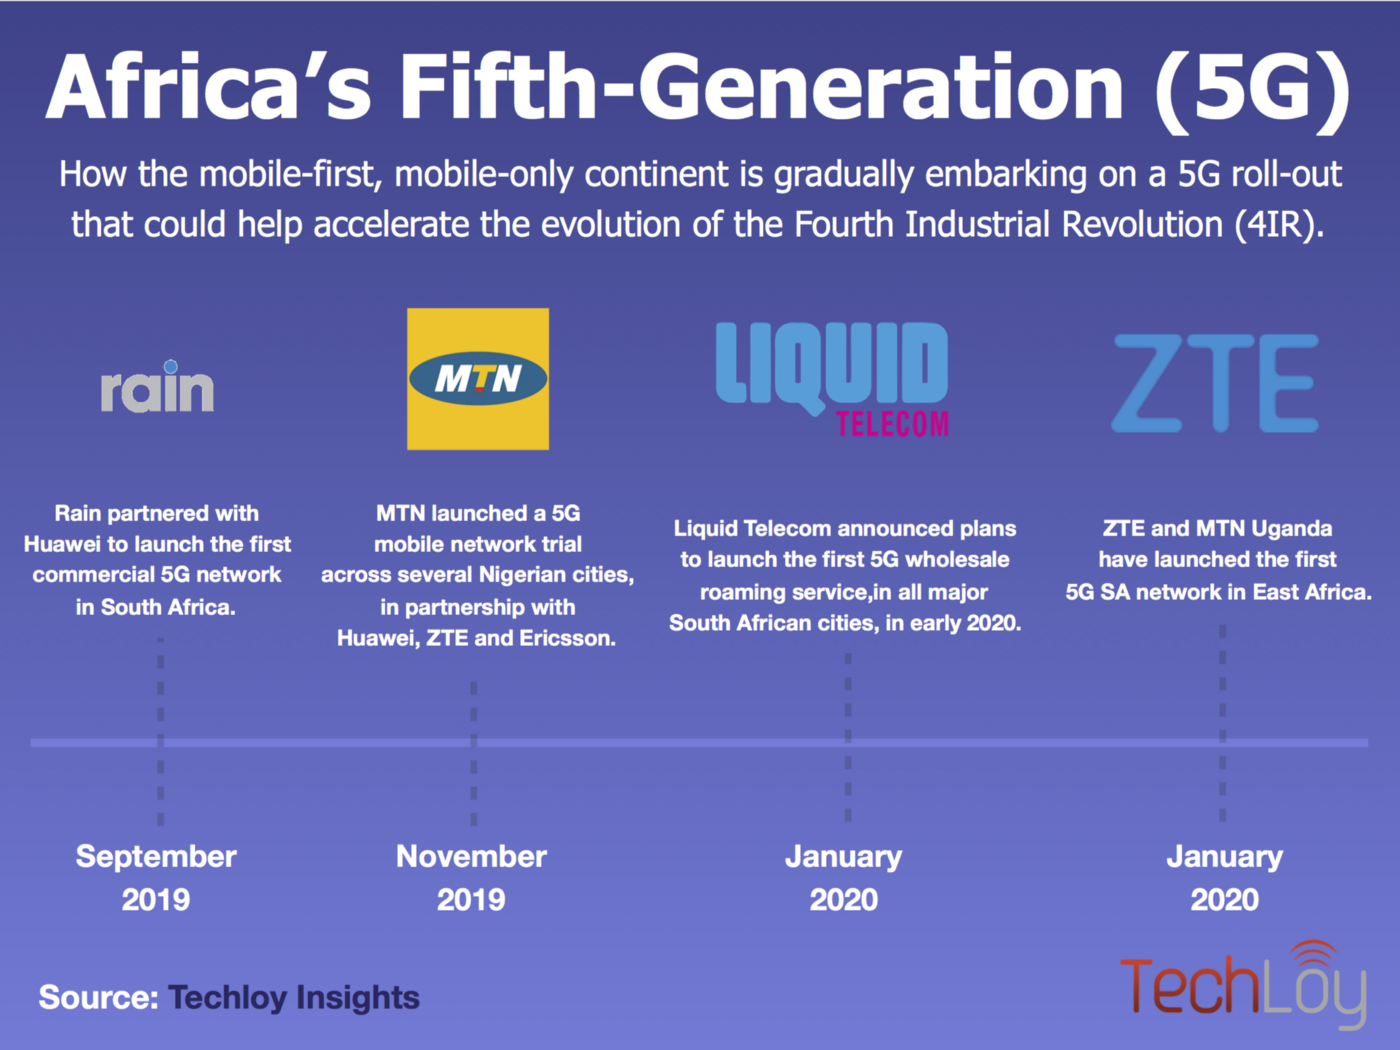 Africa’s Fifth Generation (5G) Journey